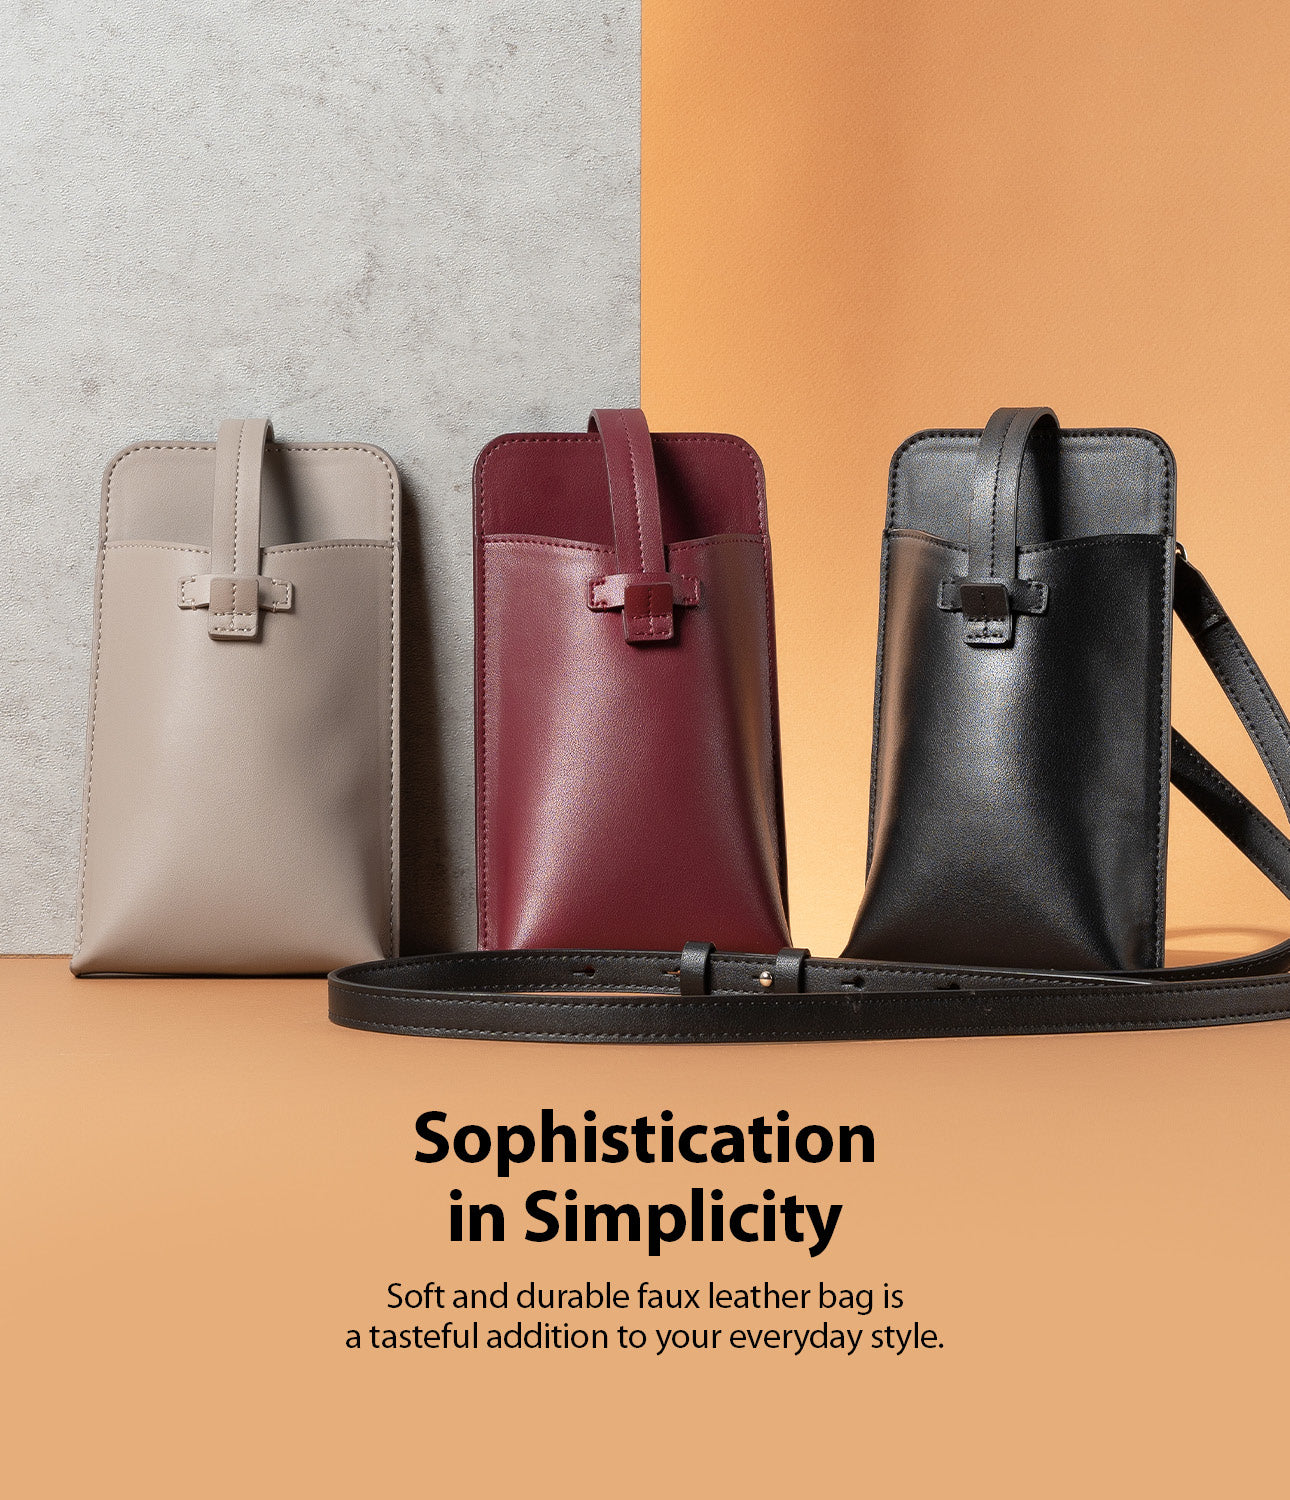 sophistication in simplicity - soft and durable faux leather bag is a tasteful addition to your everyday style.